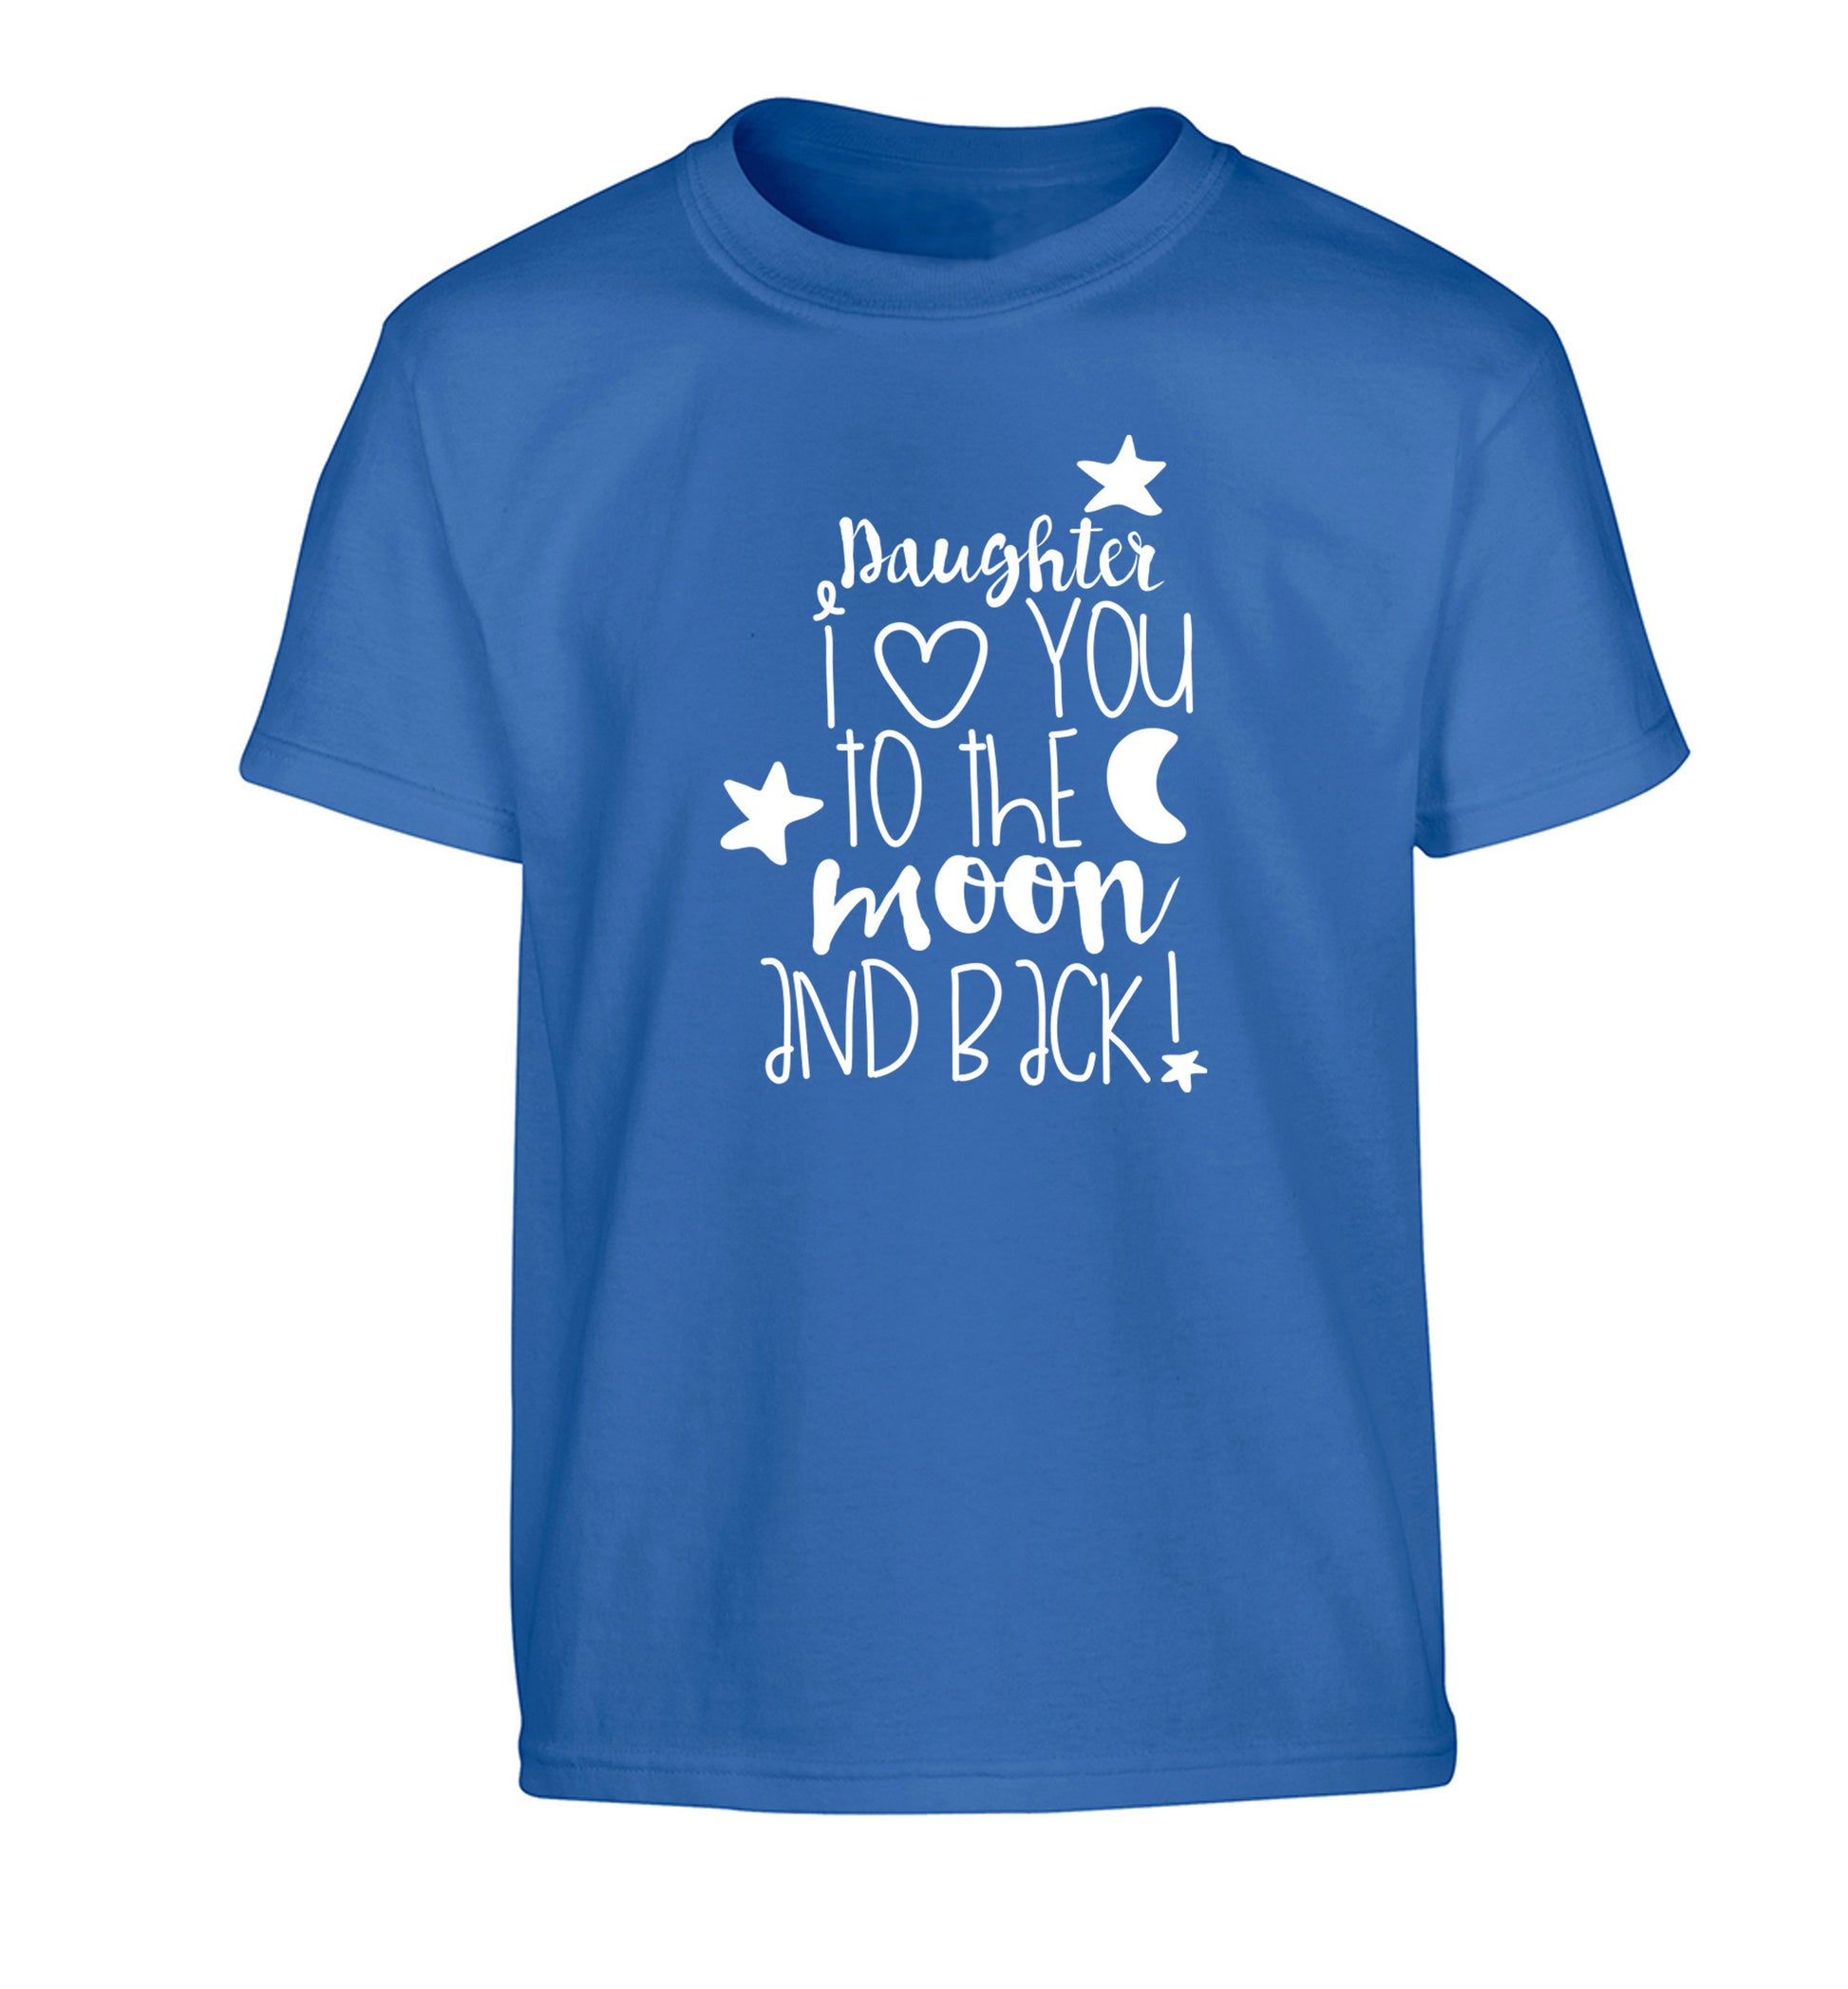 Daughter I love you to the moon and back Children's blue Tshirt 12-14 Years